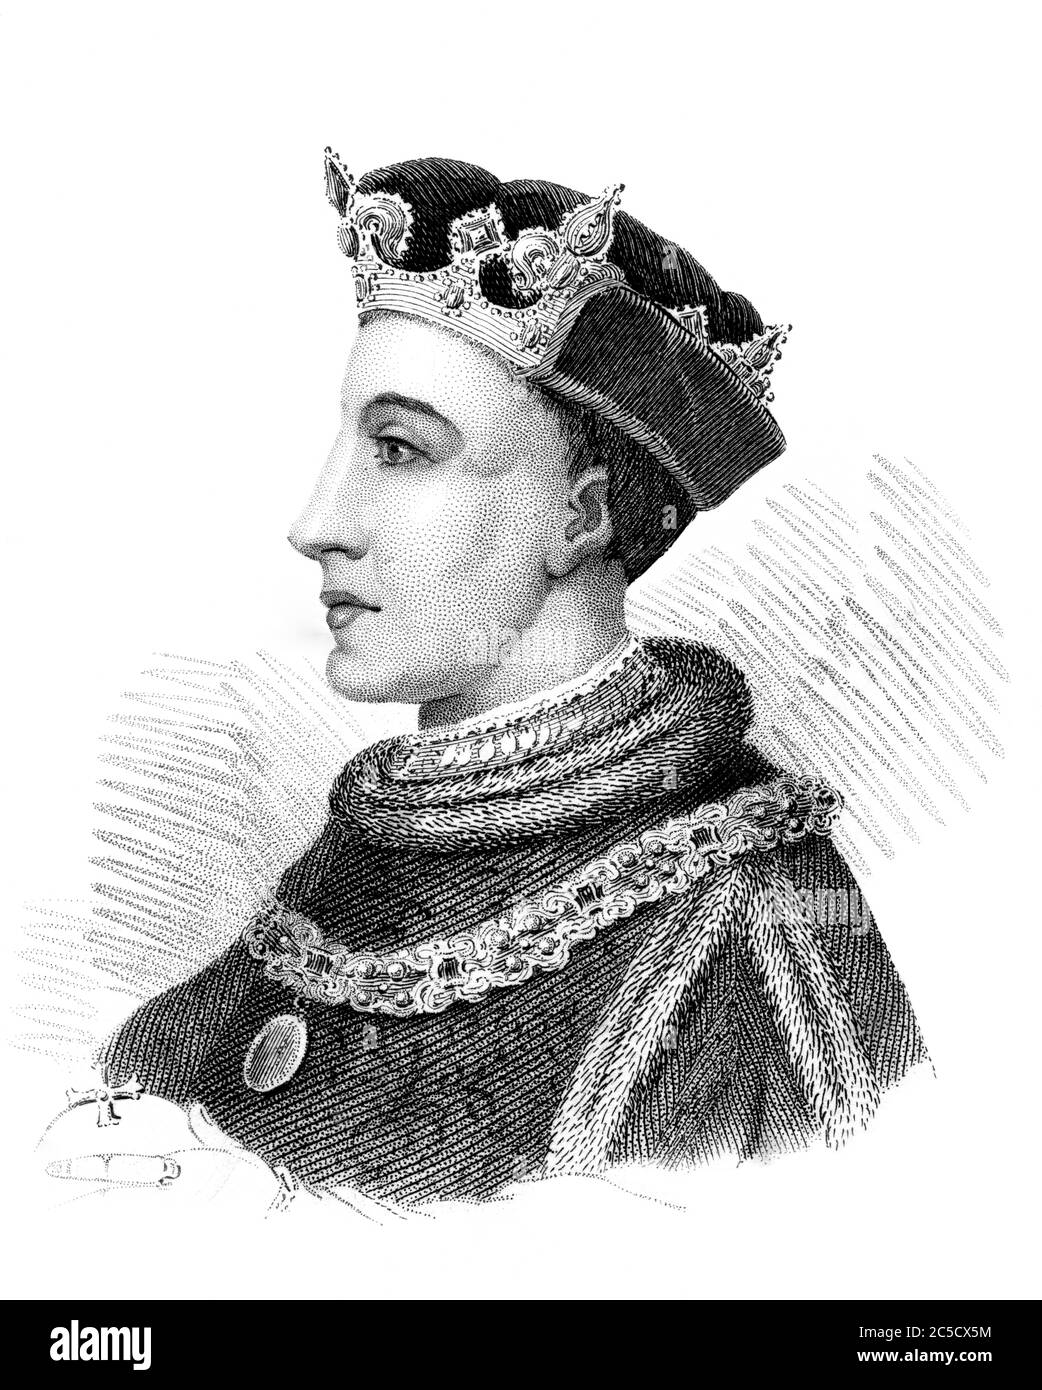 An engraved vintage illustration portrait image of Henry V king of England, UK, from a Victorian book dated 1847 that is no longer in copyright Stock Photo